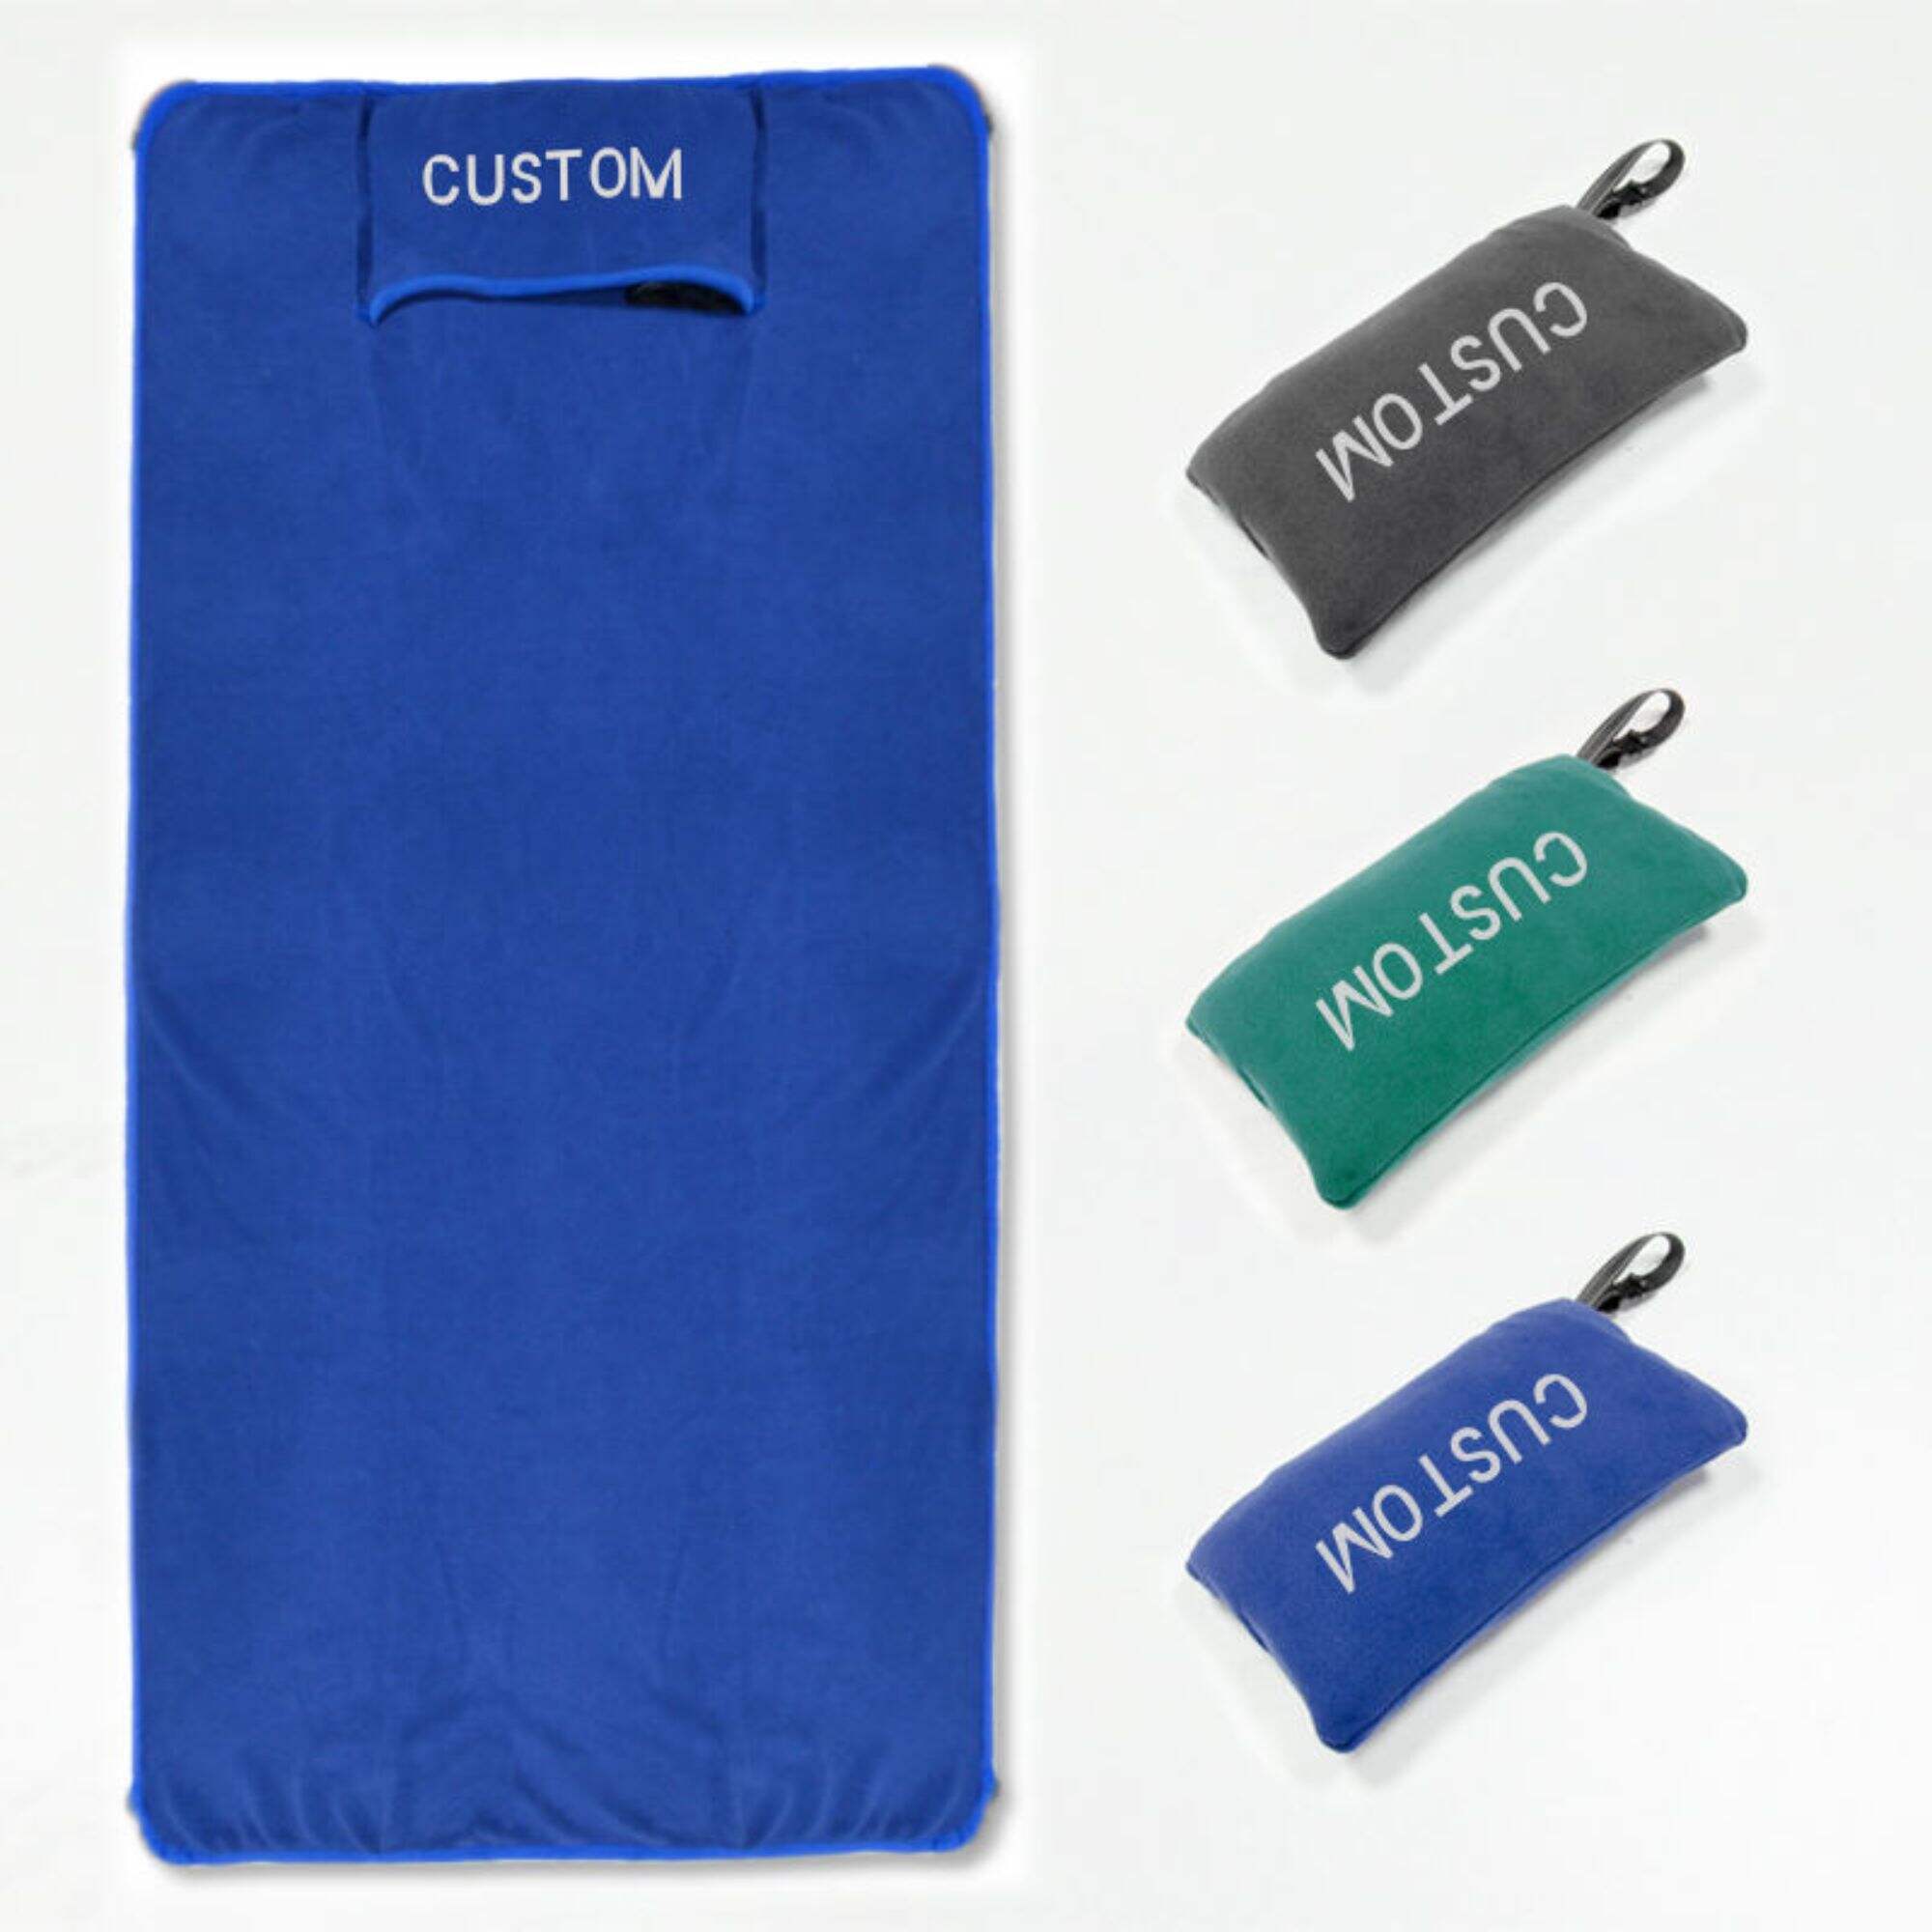 Super Soft 2 In 1 Travel Gift Blanket With Pocket 2 In 1